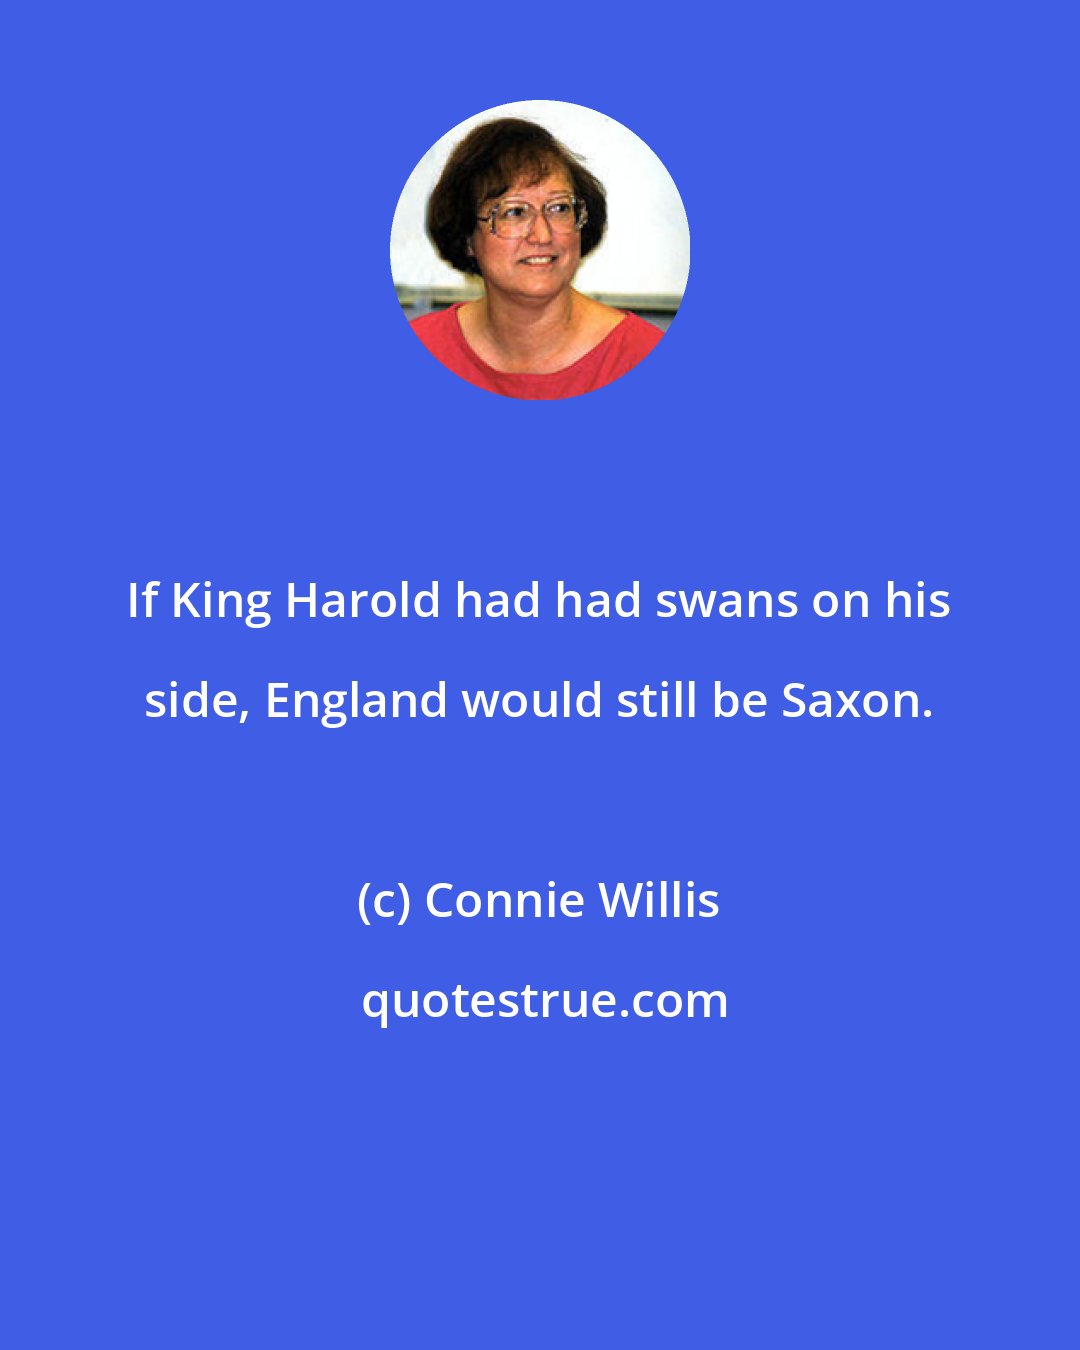 Connie Willis: If King Harold had had swans on his side, England would still be Saxon.